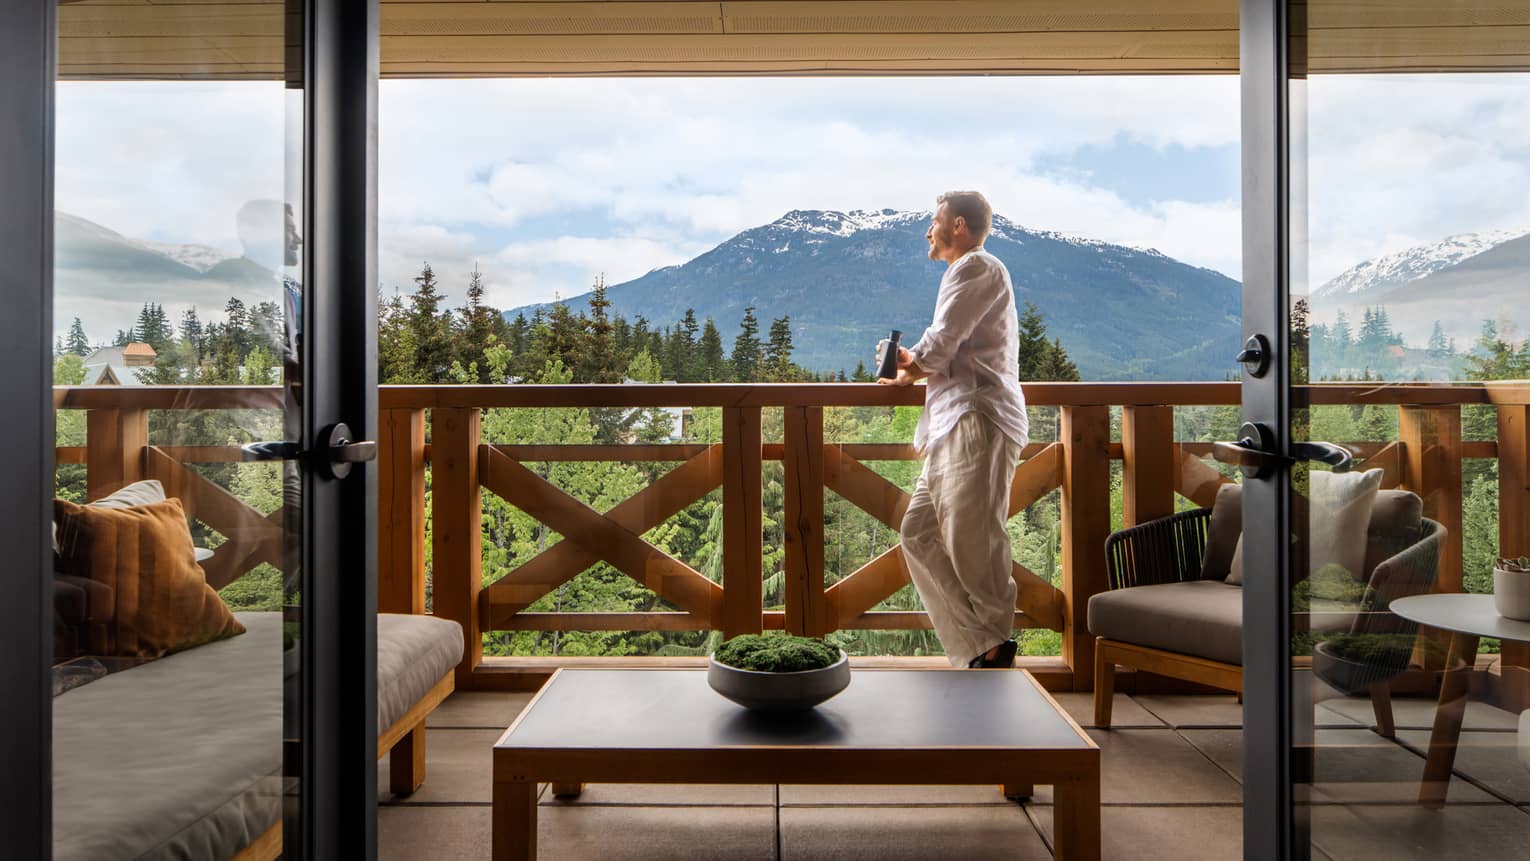 Man with short hair wearing a white long-sleeve shirt and khaki pants leans on the railing of a balcony with a beer in hand, looking out onto the mountain views